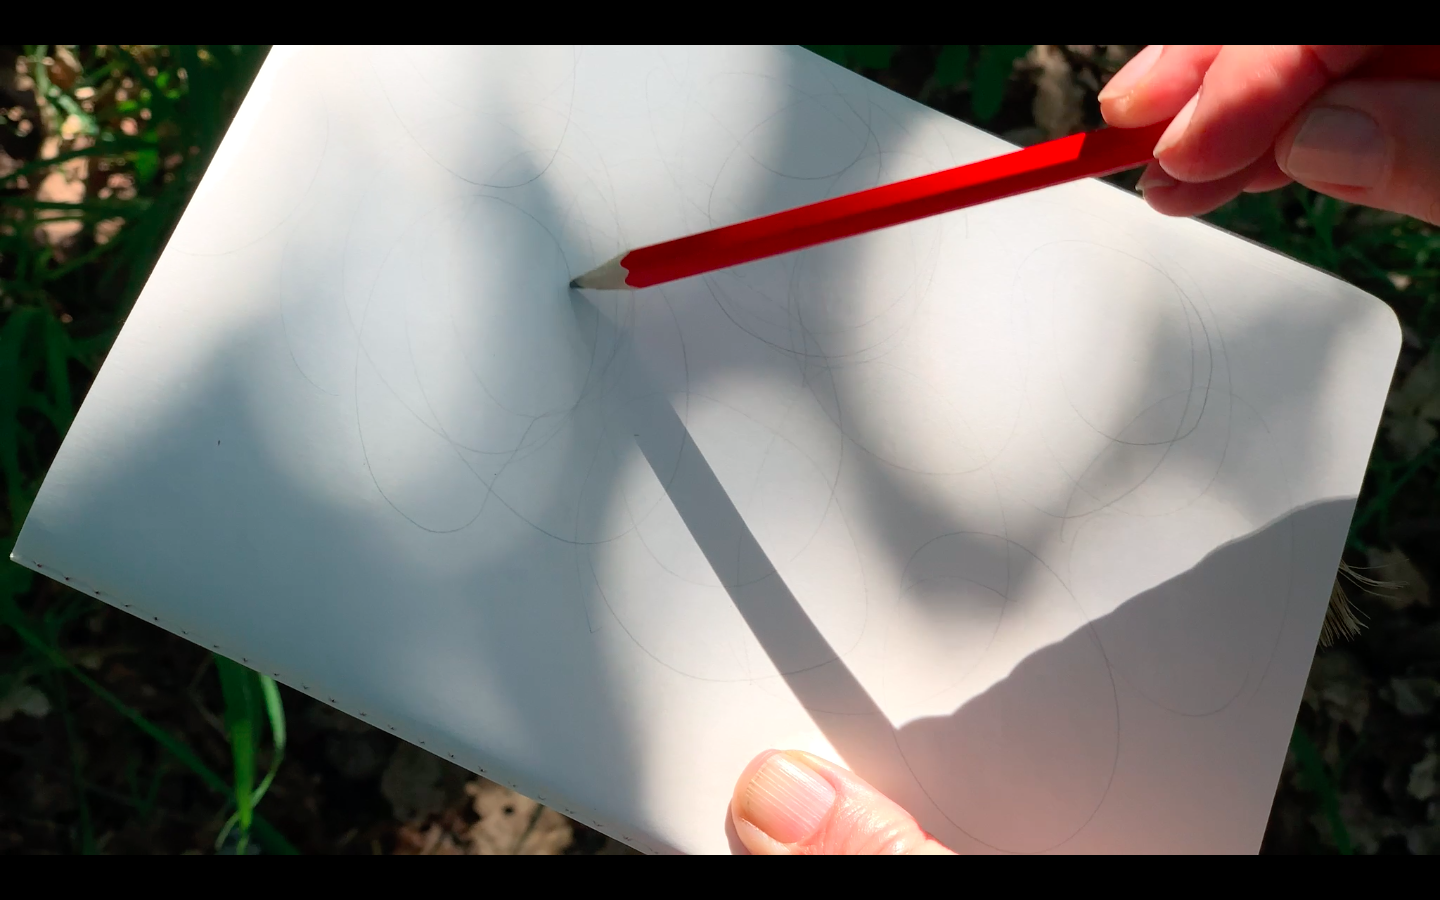 A white page and a red pencil: tracing light shadows that appear as circles